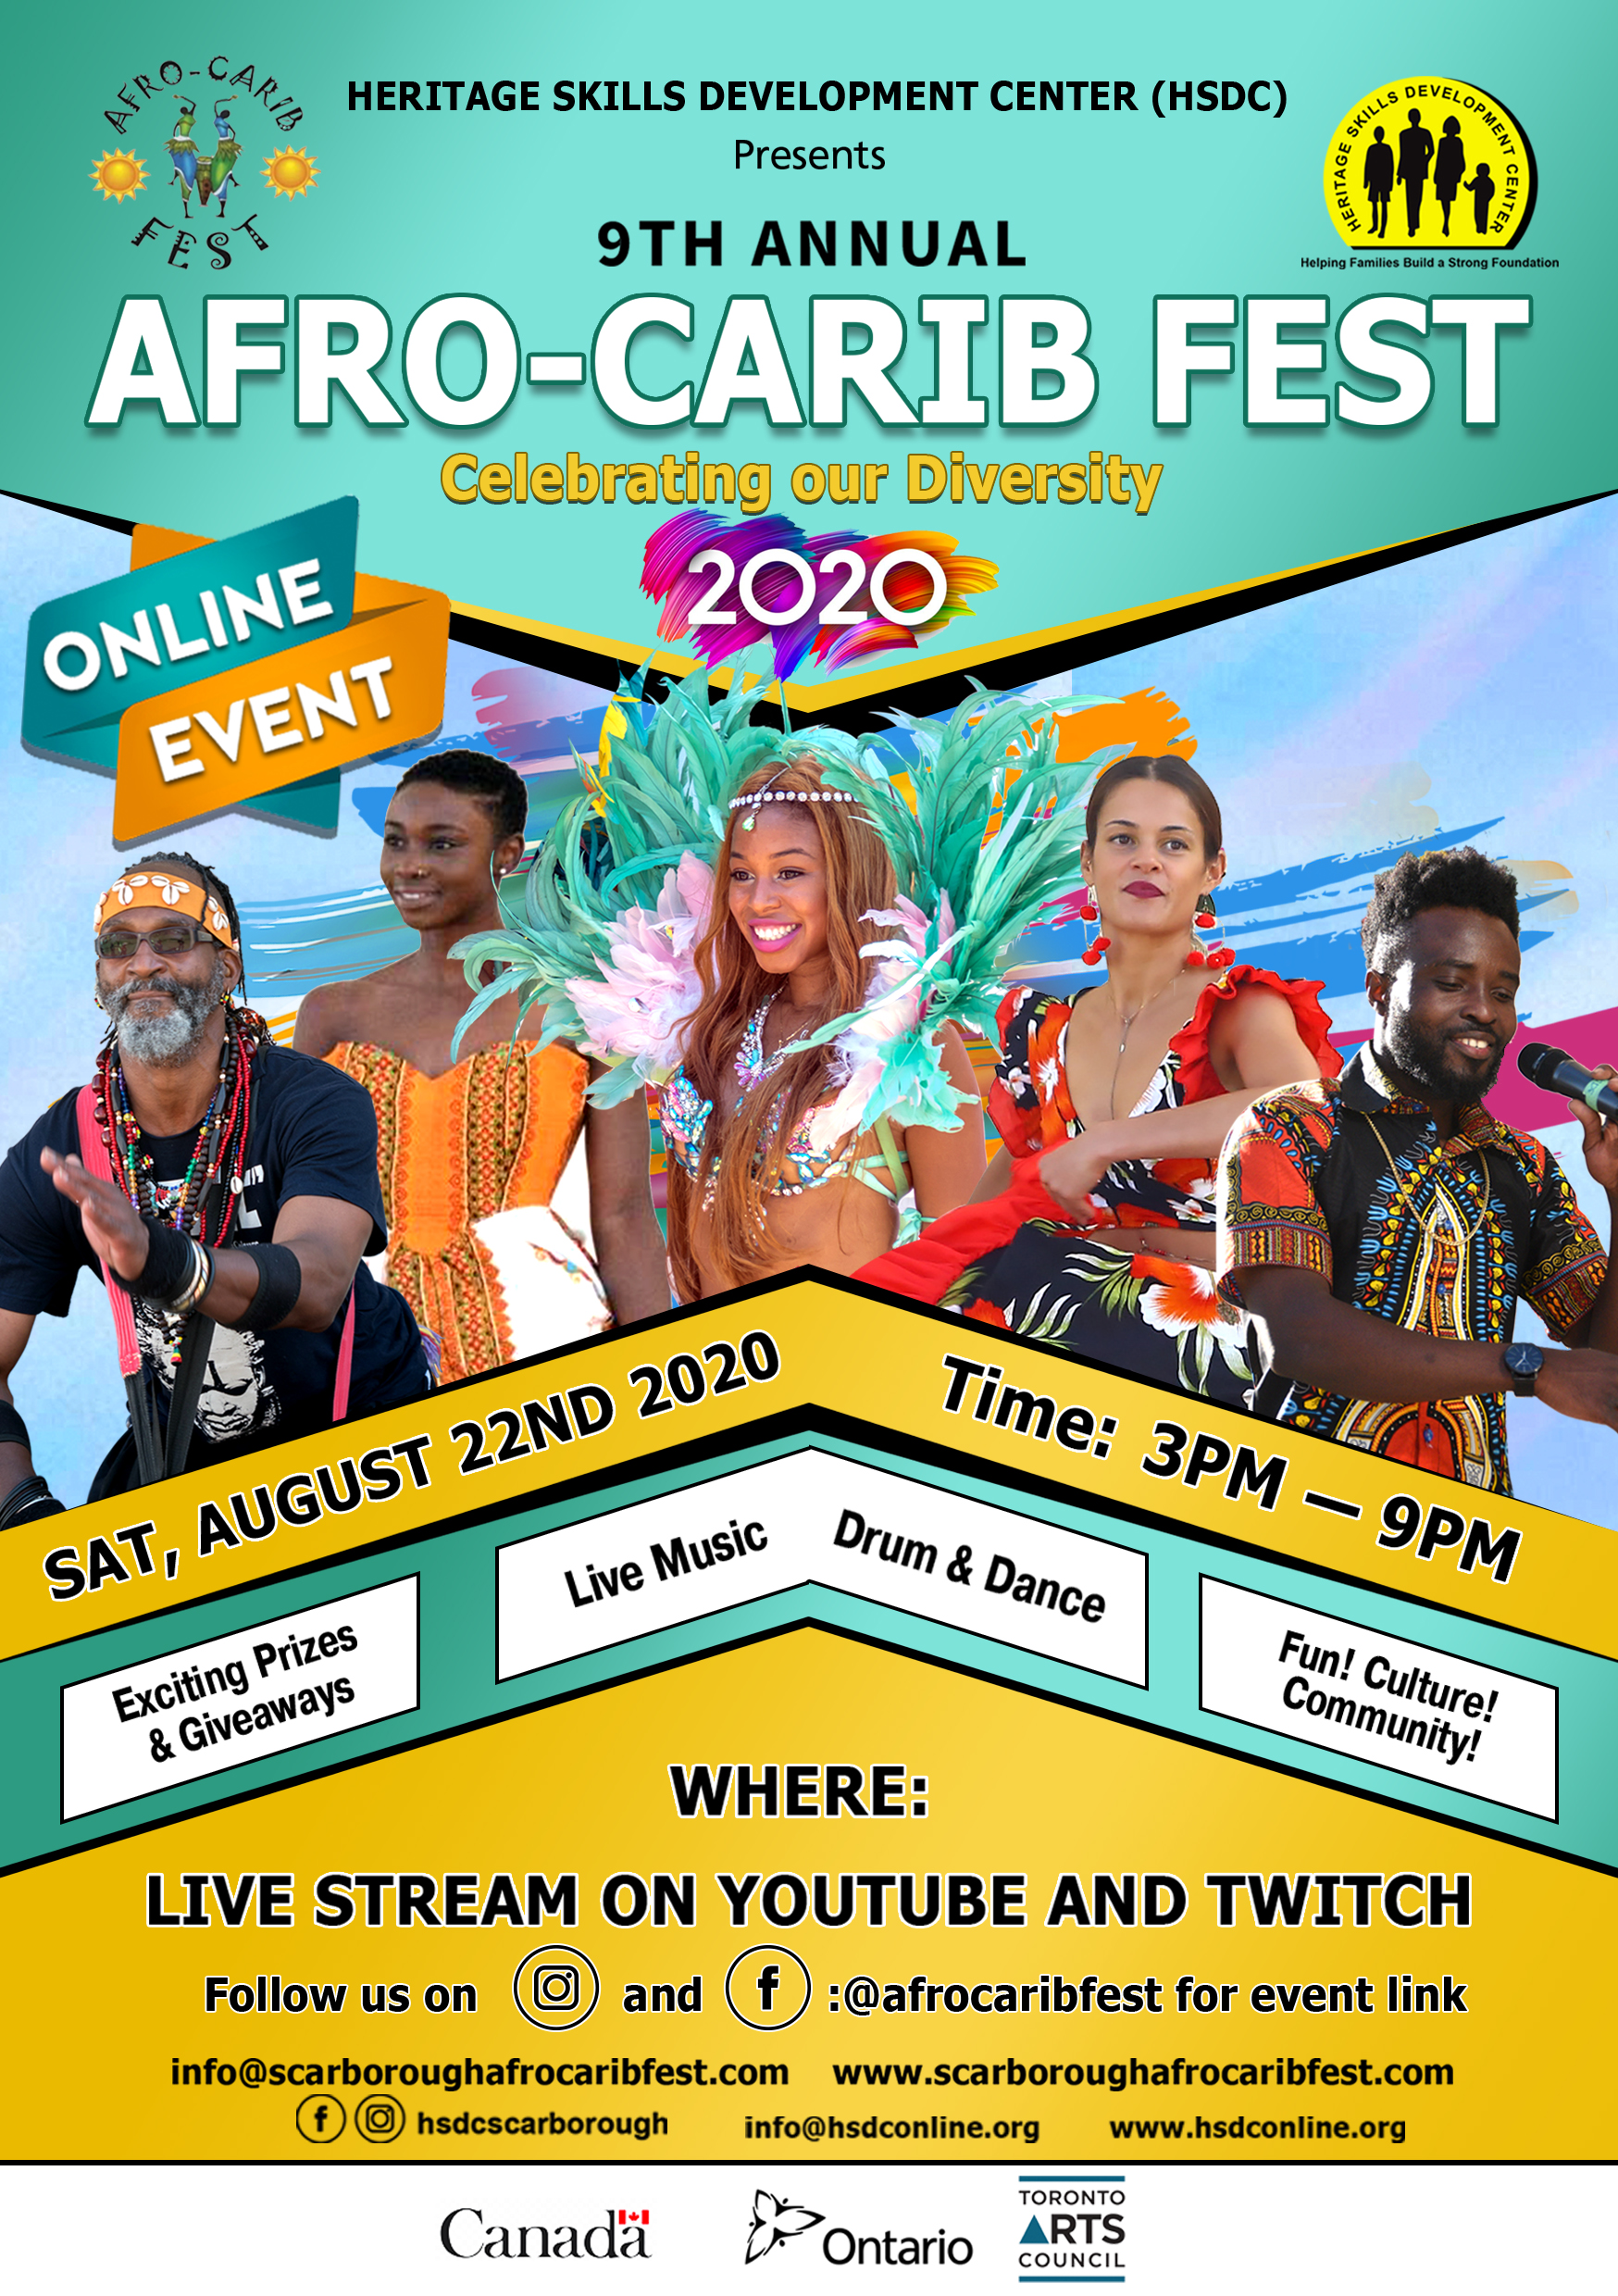 Join us for Afro Carib Fest Online on SATURDAY, AUGUST 22, 2020 from 3 PM to 9 PM